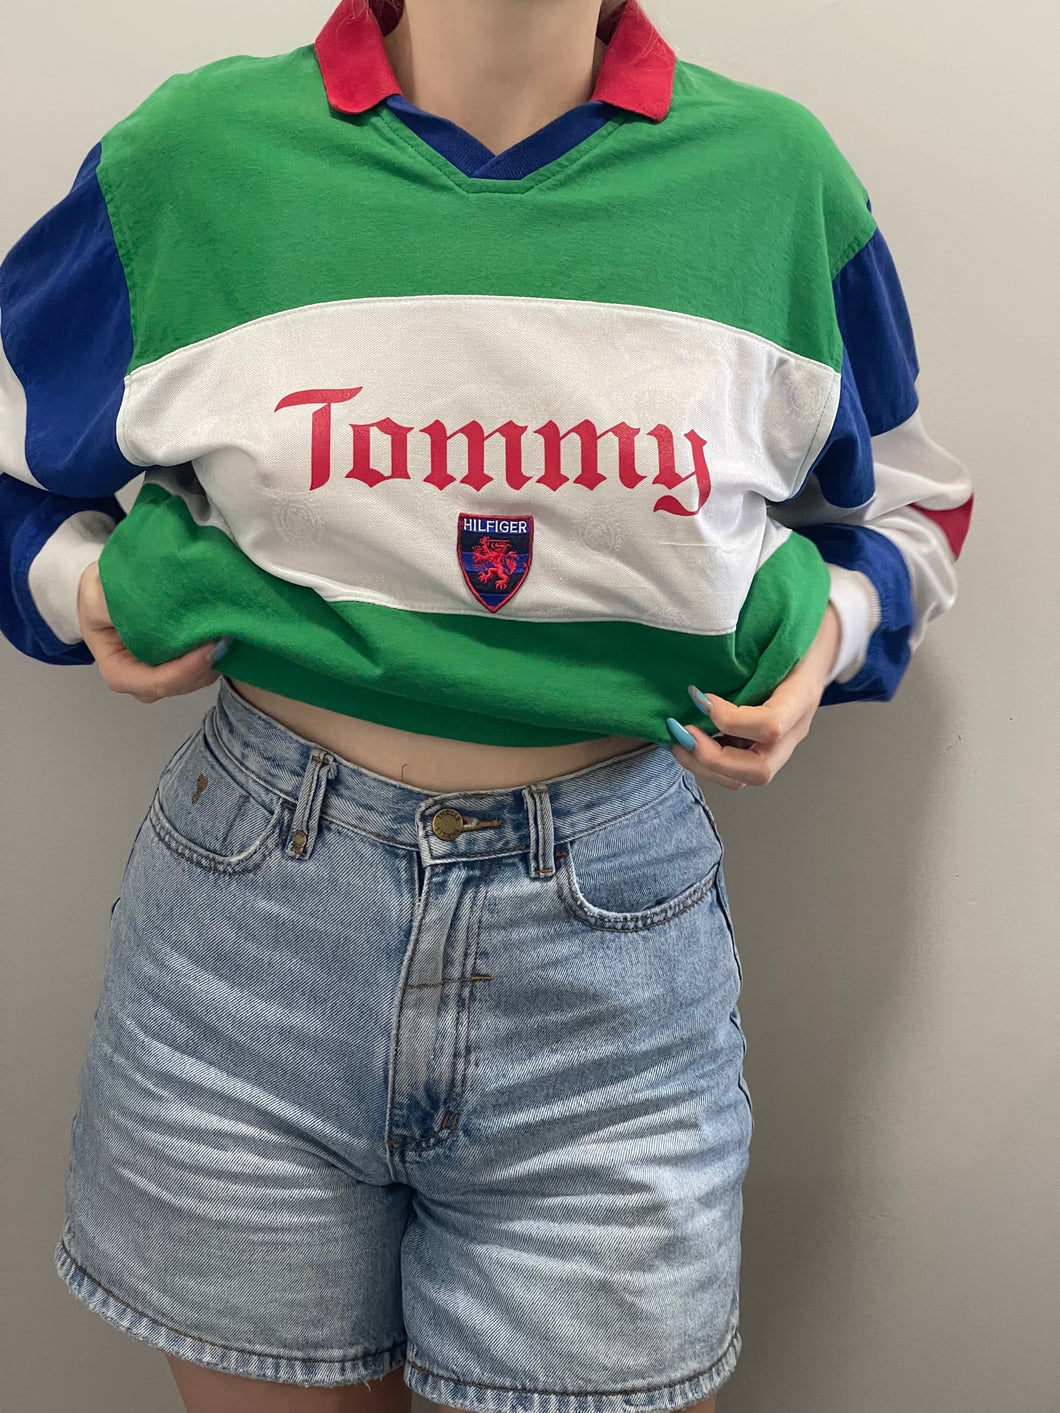 Tommy Hilfiger Green/White/Blue/Red Polo (XL)